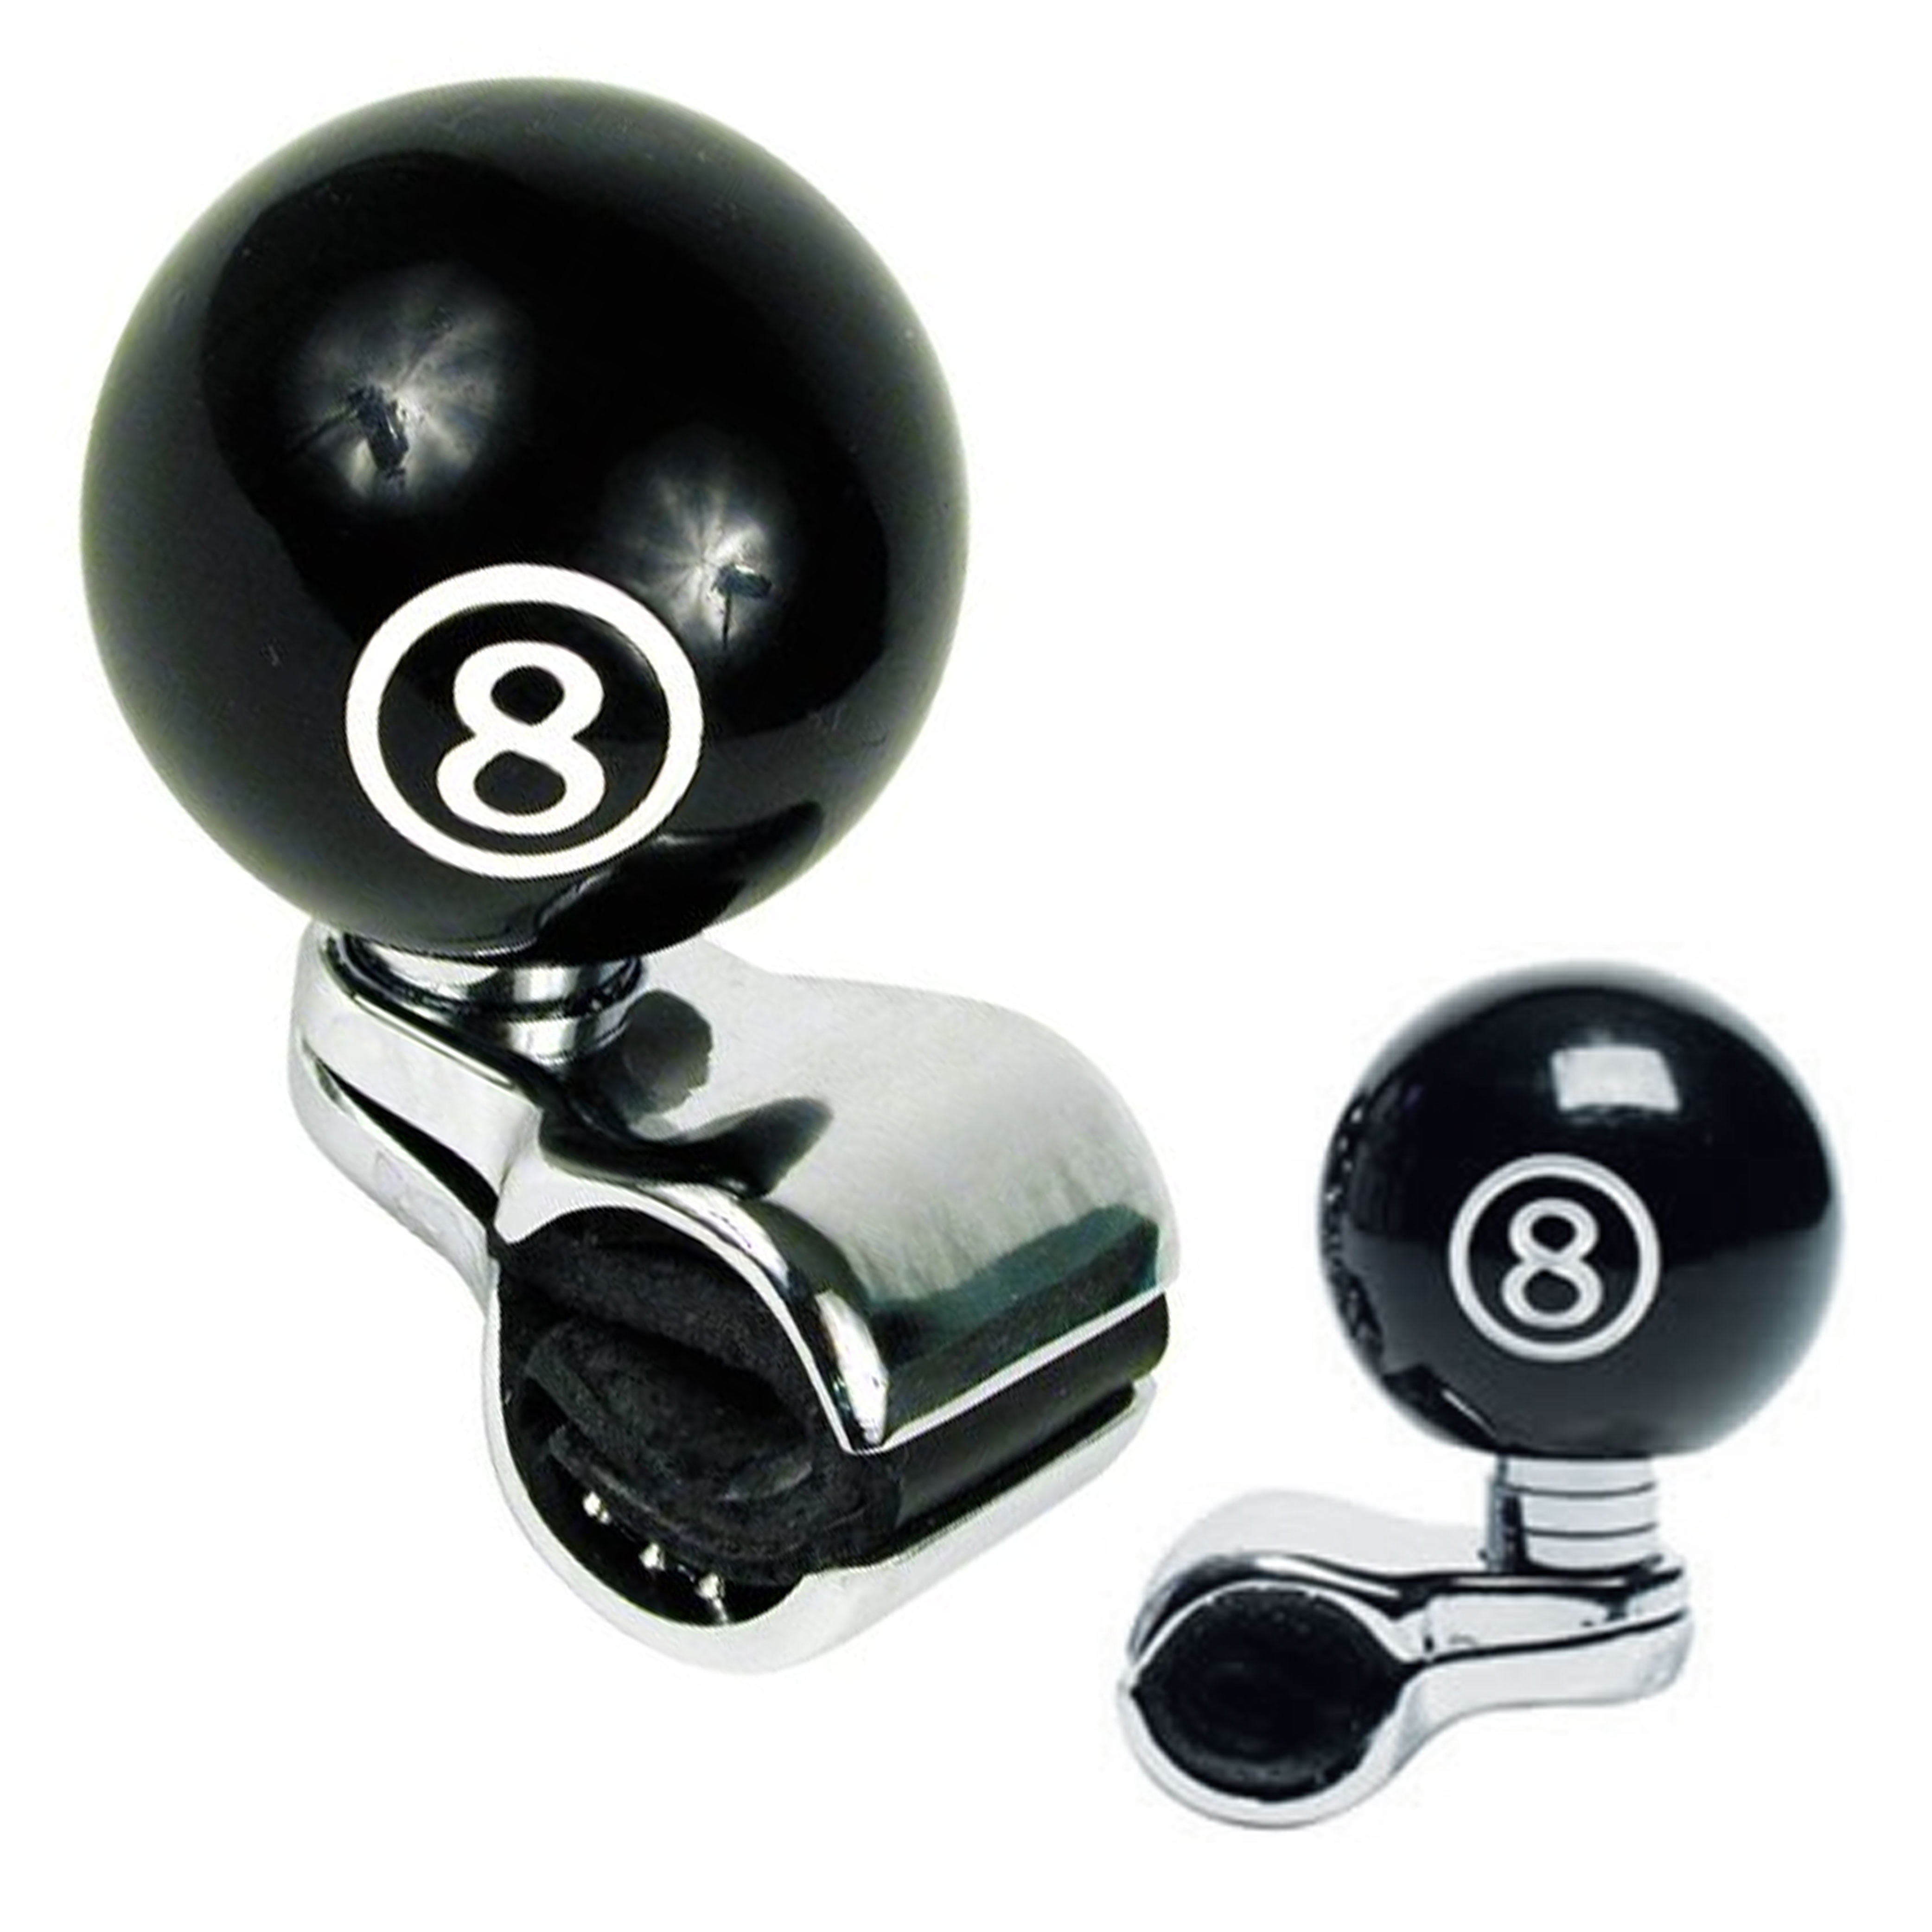 steering wheel aid power knob 8 pool ball assister hot rod retro lucky eight 